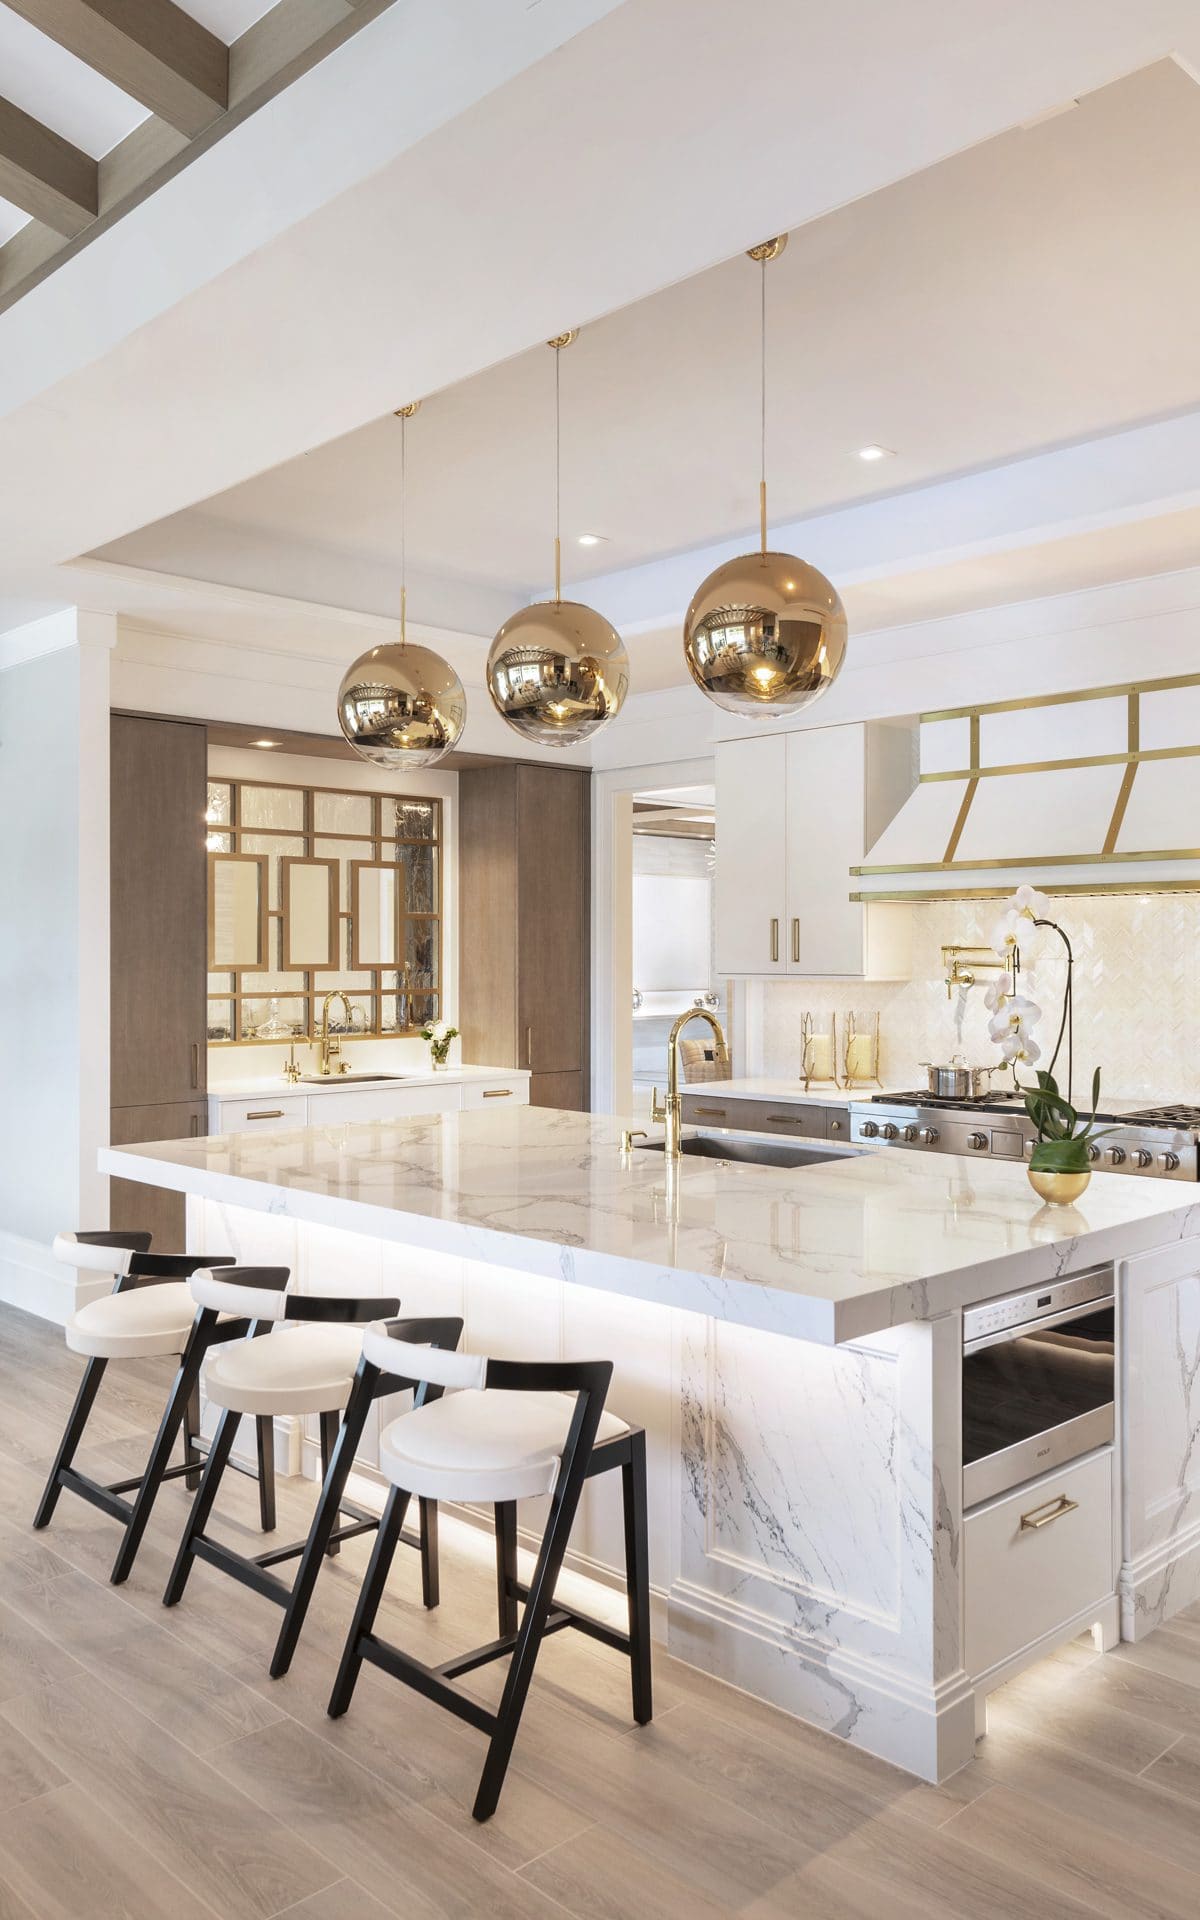 Custom Bilotta kitchen features marble island, gold pendant lights and accessories, and custom white and gold hoodvent.